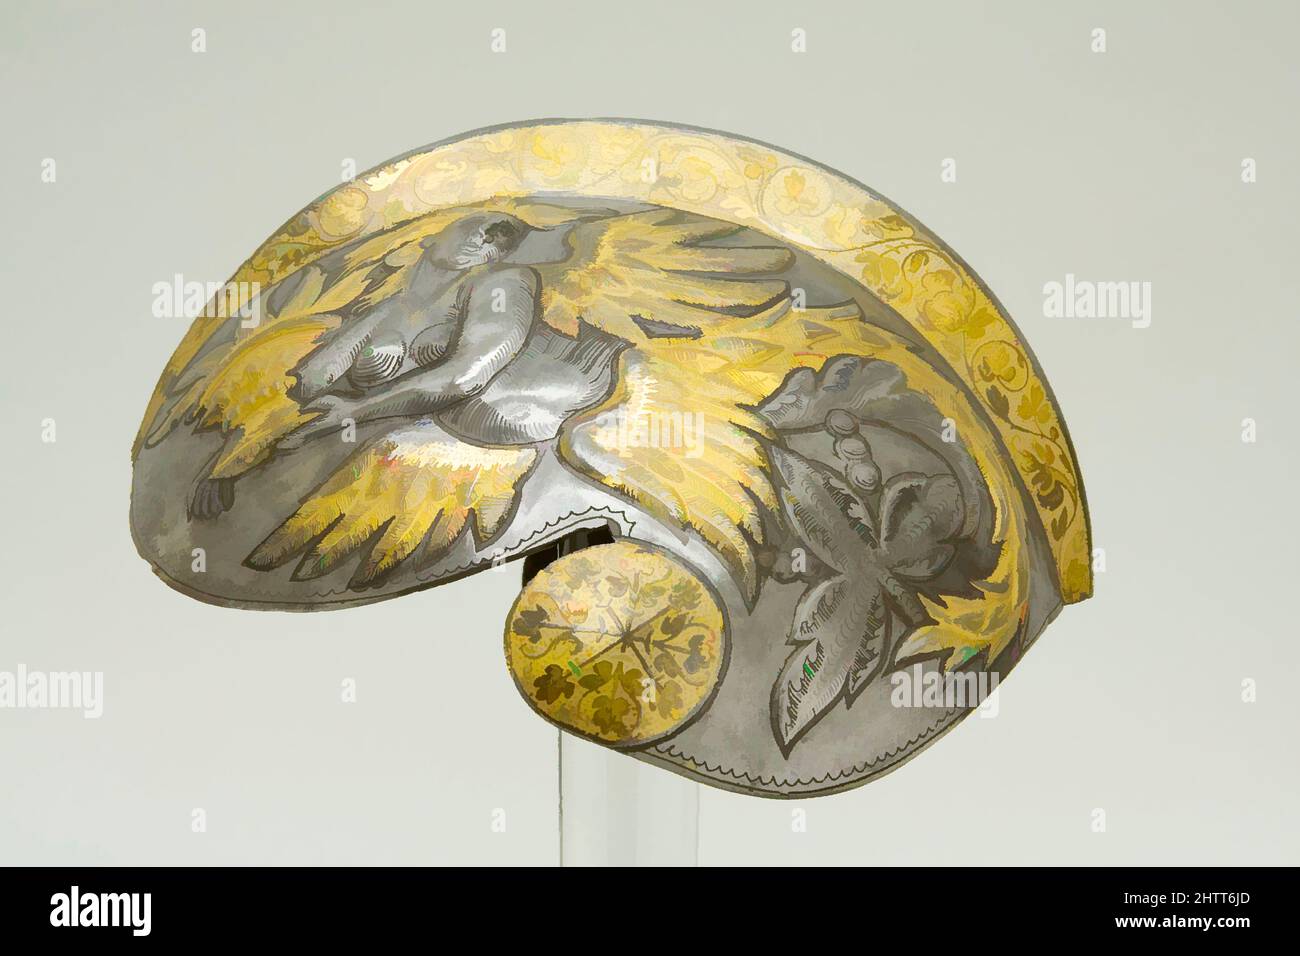 Art inspired by Reinforce for a Helmet (Gupfe), 1549–50, Augsburg, German, Augsburg, Steel, gold, H. 5 5/8 in. (14.3 cm); W. 8 11/16 in. (22.1 cm); D. 9 1/8 in. (23.2 cm); Wt. 1 lb. 5 oz. (595 g), Helmets, This exquisitely decorated plate fit as a reinforce over the bowl of a helmet, Classic works modernized by Artotop with a splash of modernity. Shapes, color and value, eye-catching visual impact on art. Emotions through freedom of artworks in a contemporary way. A timeless message pursuing a wildly creative new direction. Artists turning to the digital medium and creating the Artotop NFT Stock Photo